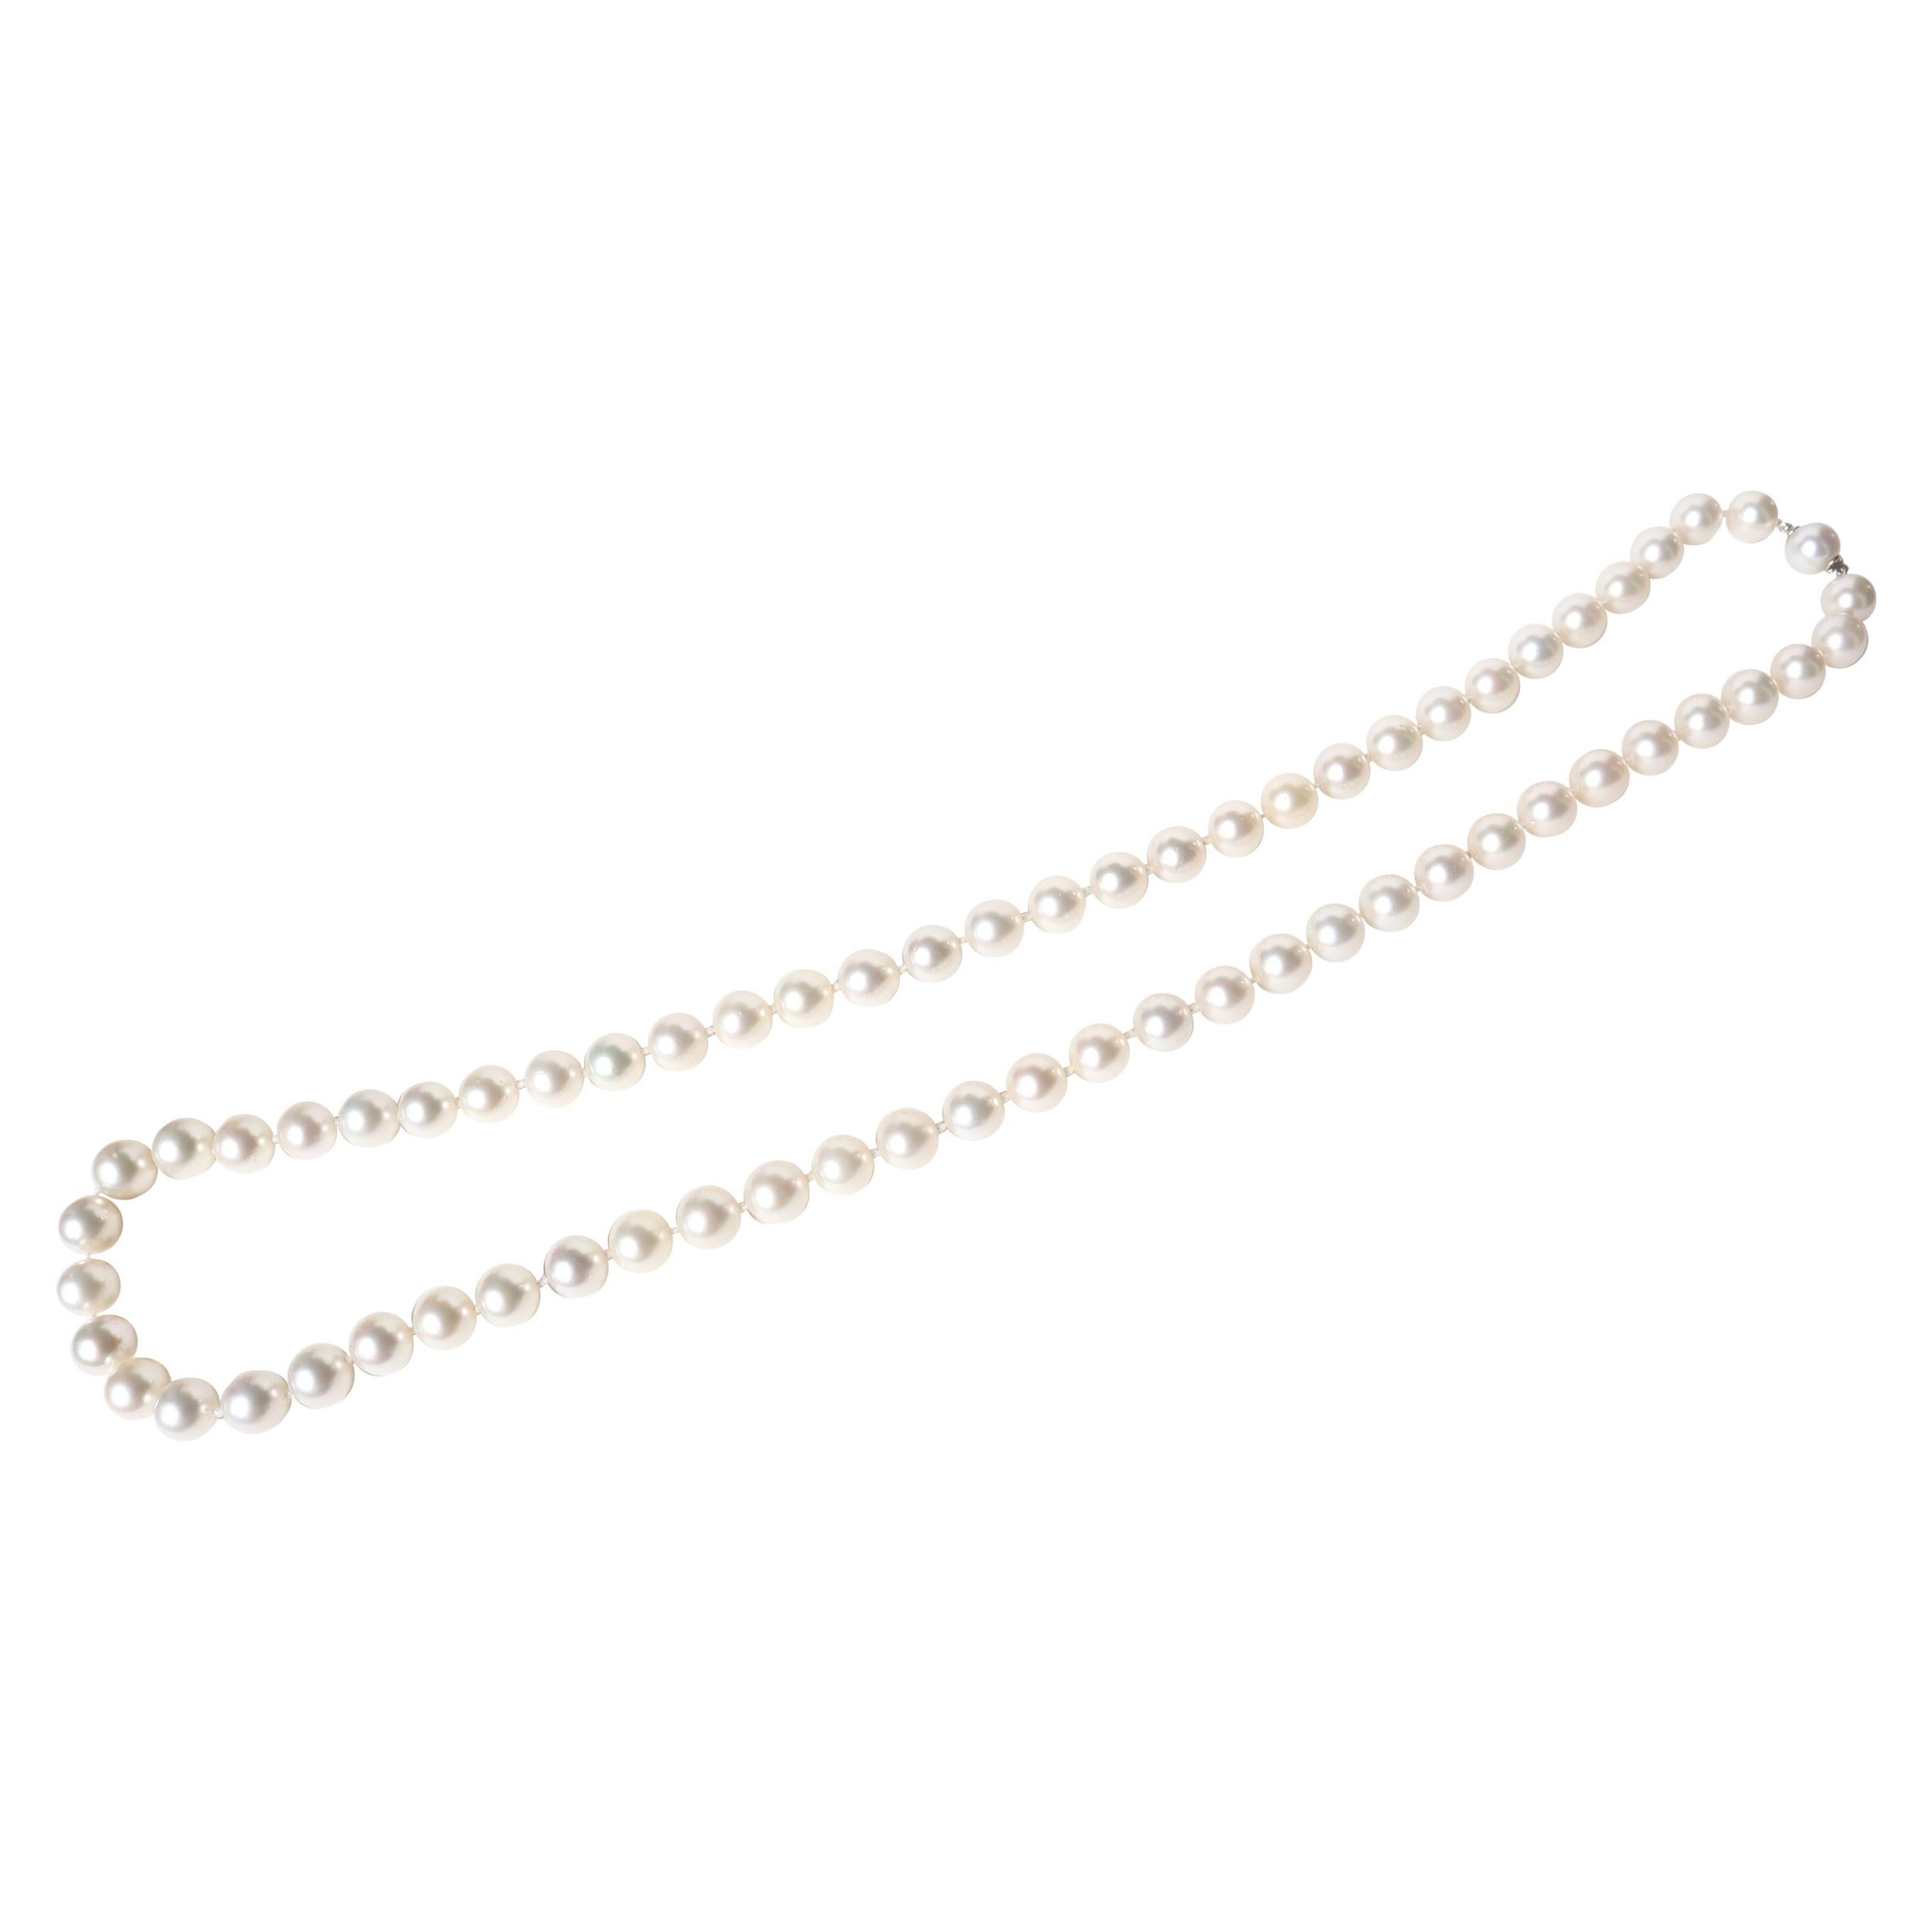 Long Necklace of White Cultured Pearls 12-13mm White Gold Clasp For Sale